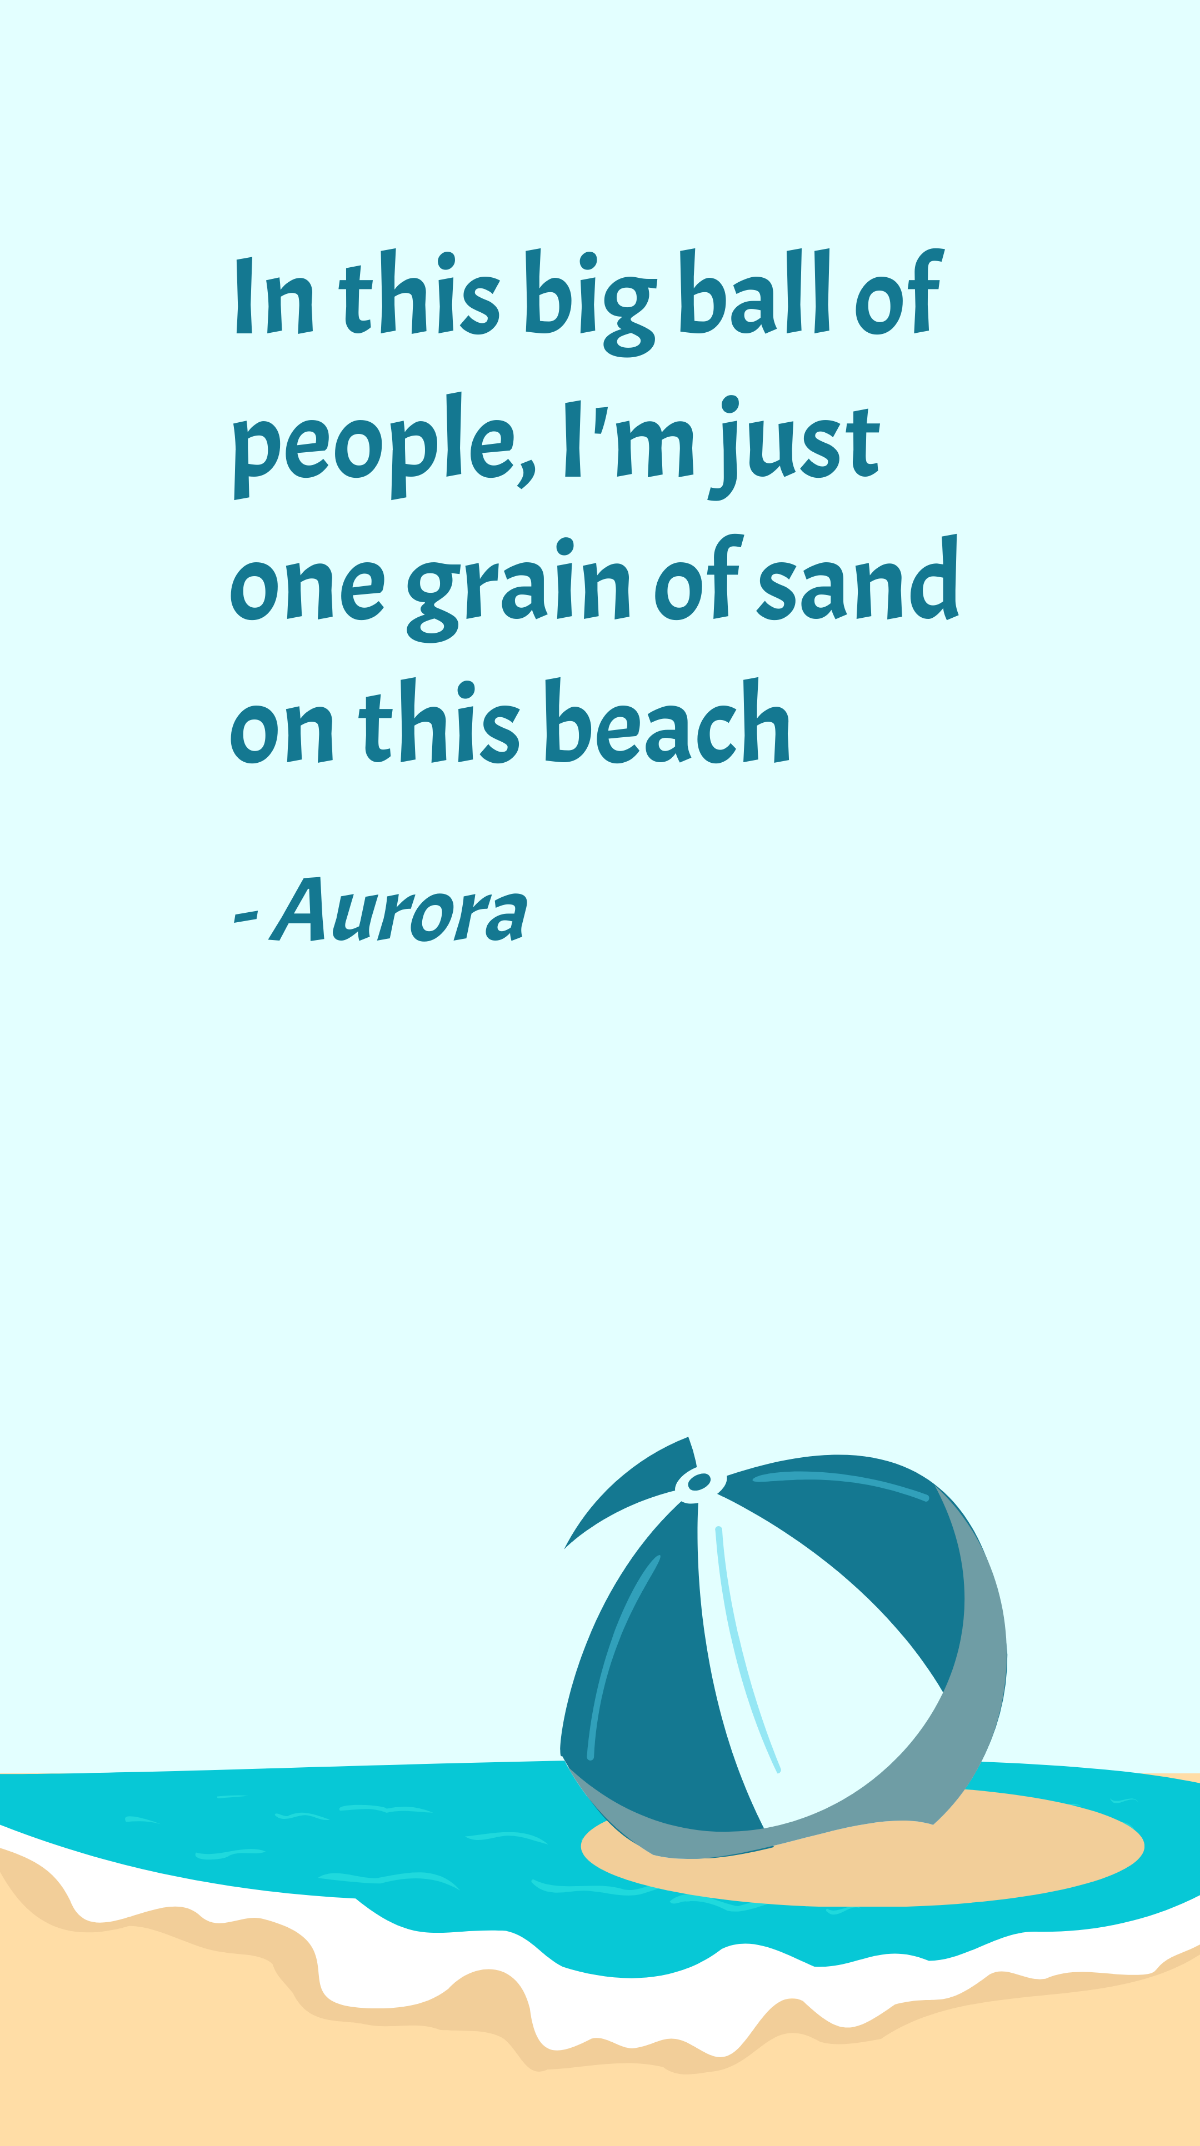 Aurora - In this big ball of people, I'm just one grain of sand on this beach Template